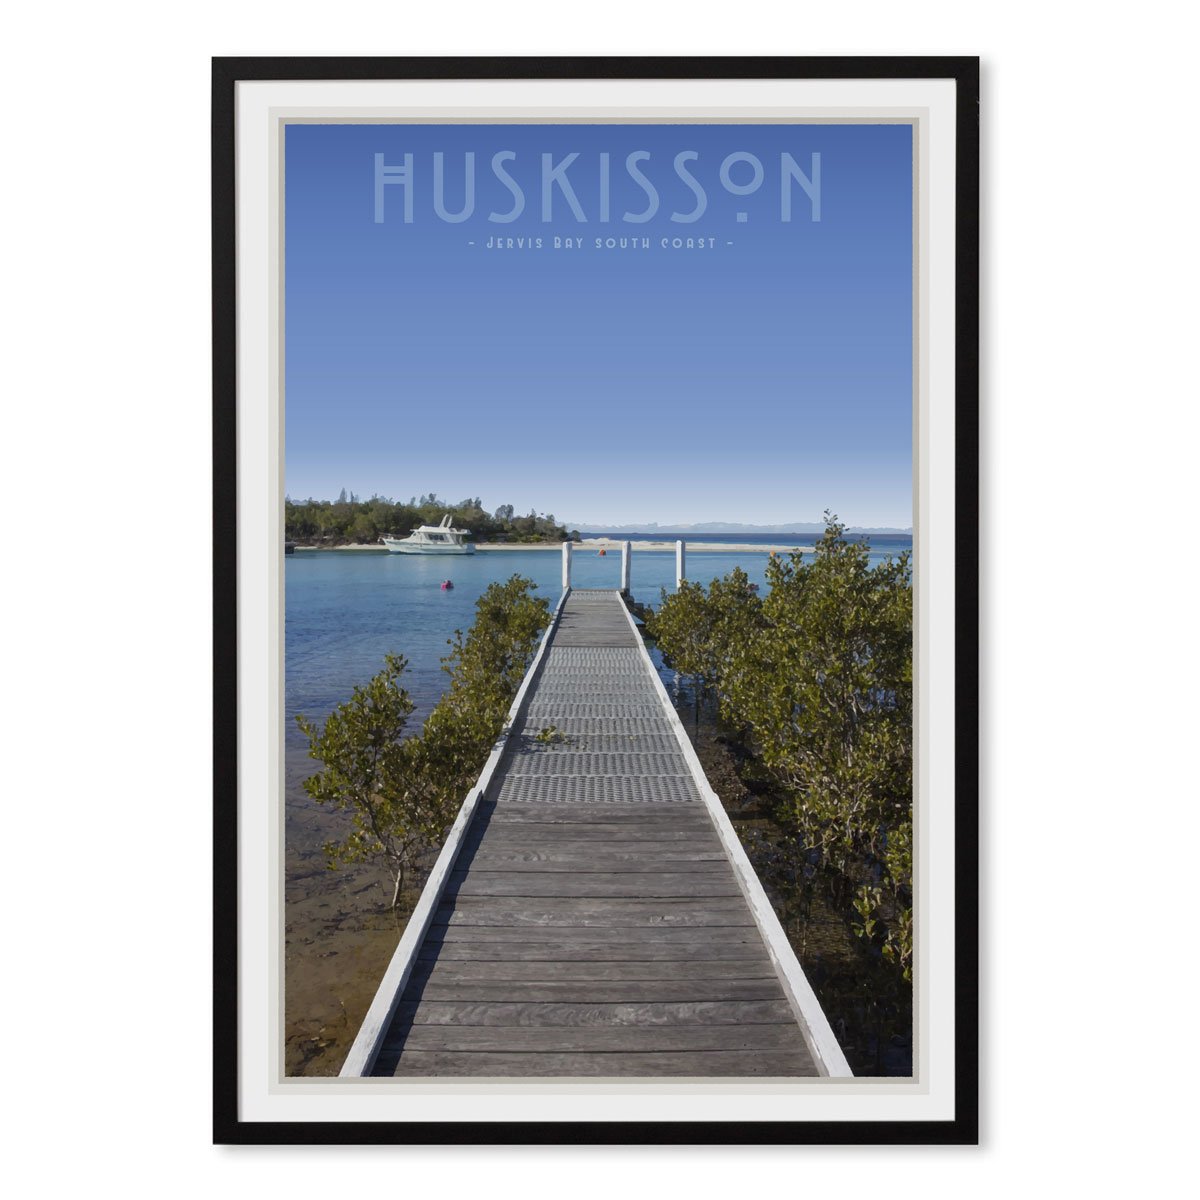 Huskisson vintage travel style black framed print by places we luv